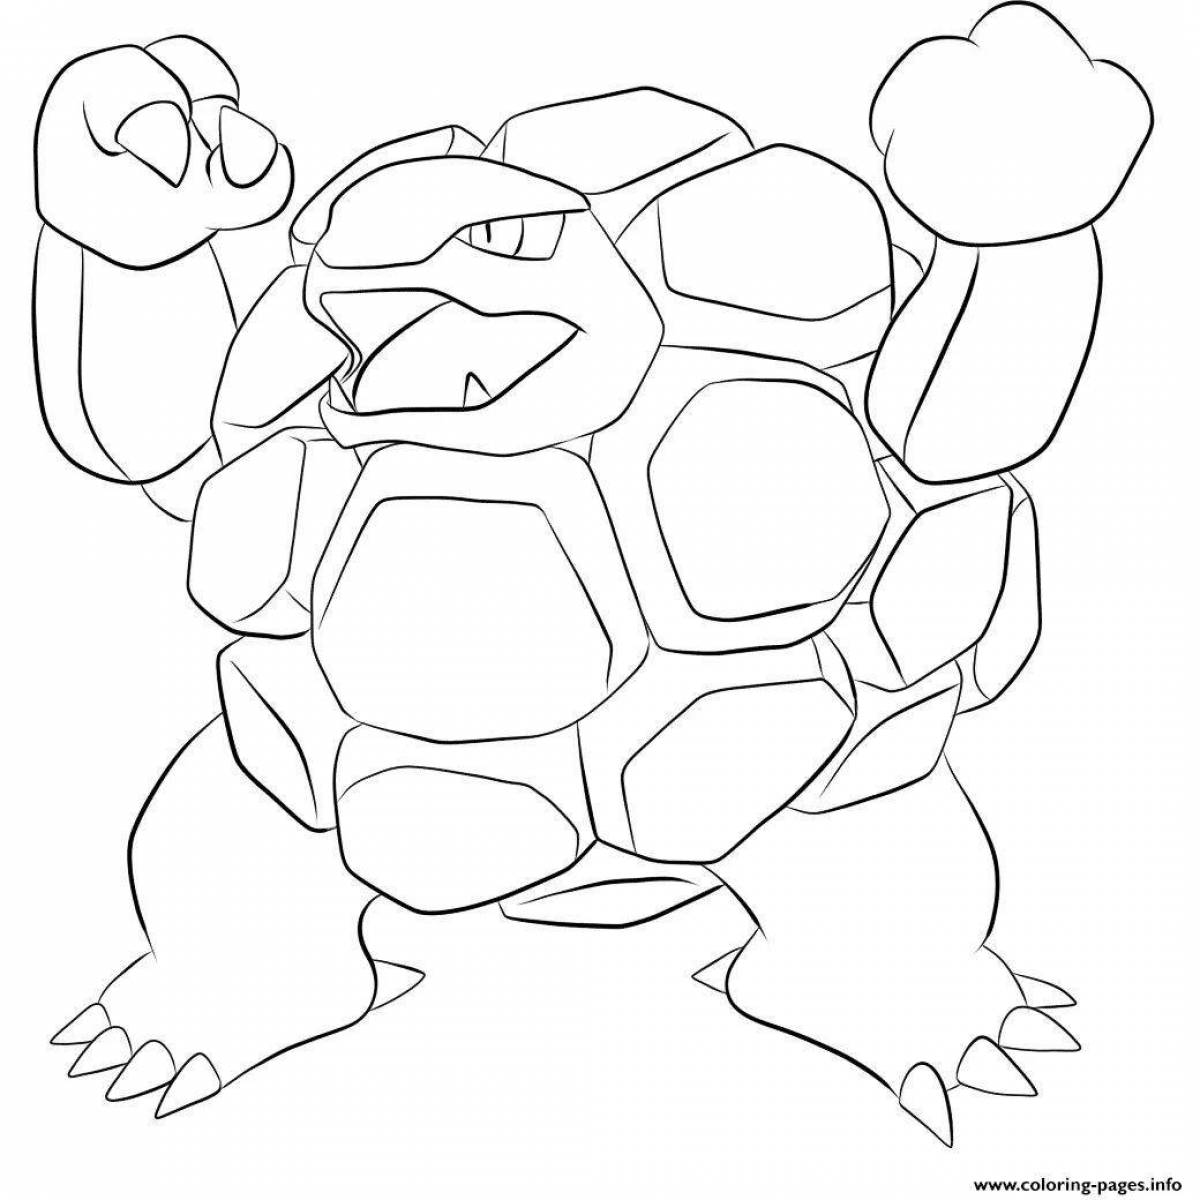 Fascinating minecraft turtle coloring page